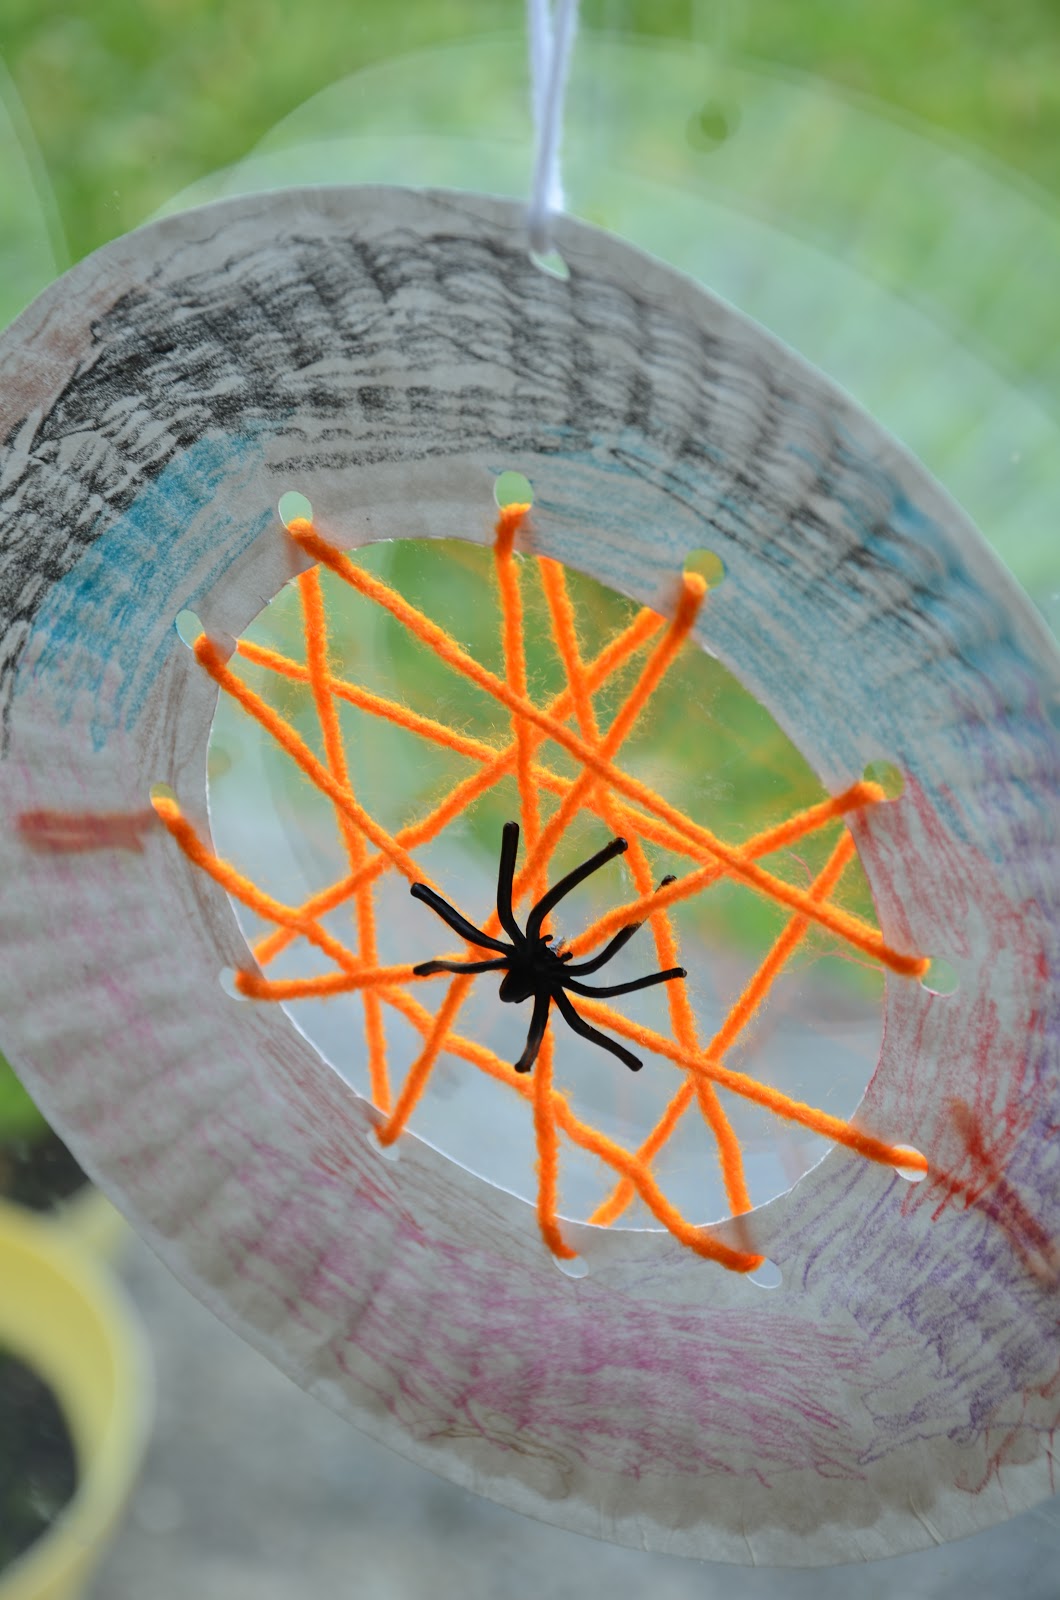 Paper Plate Spider Web Activity